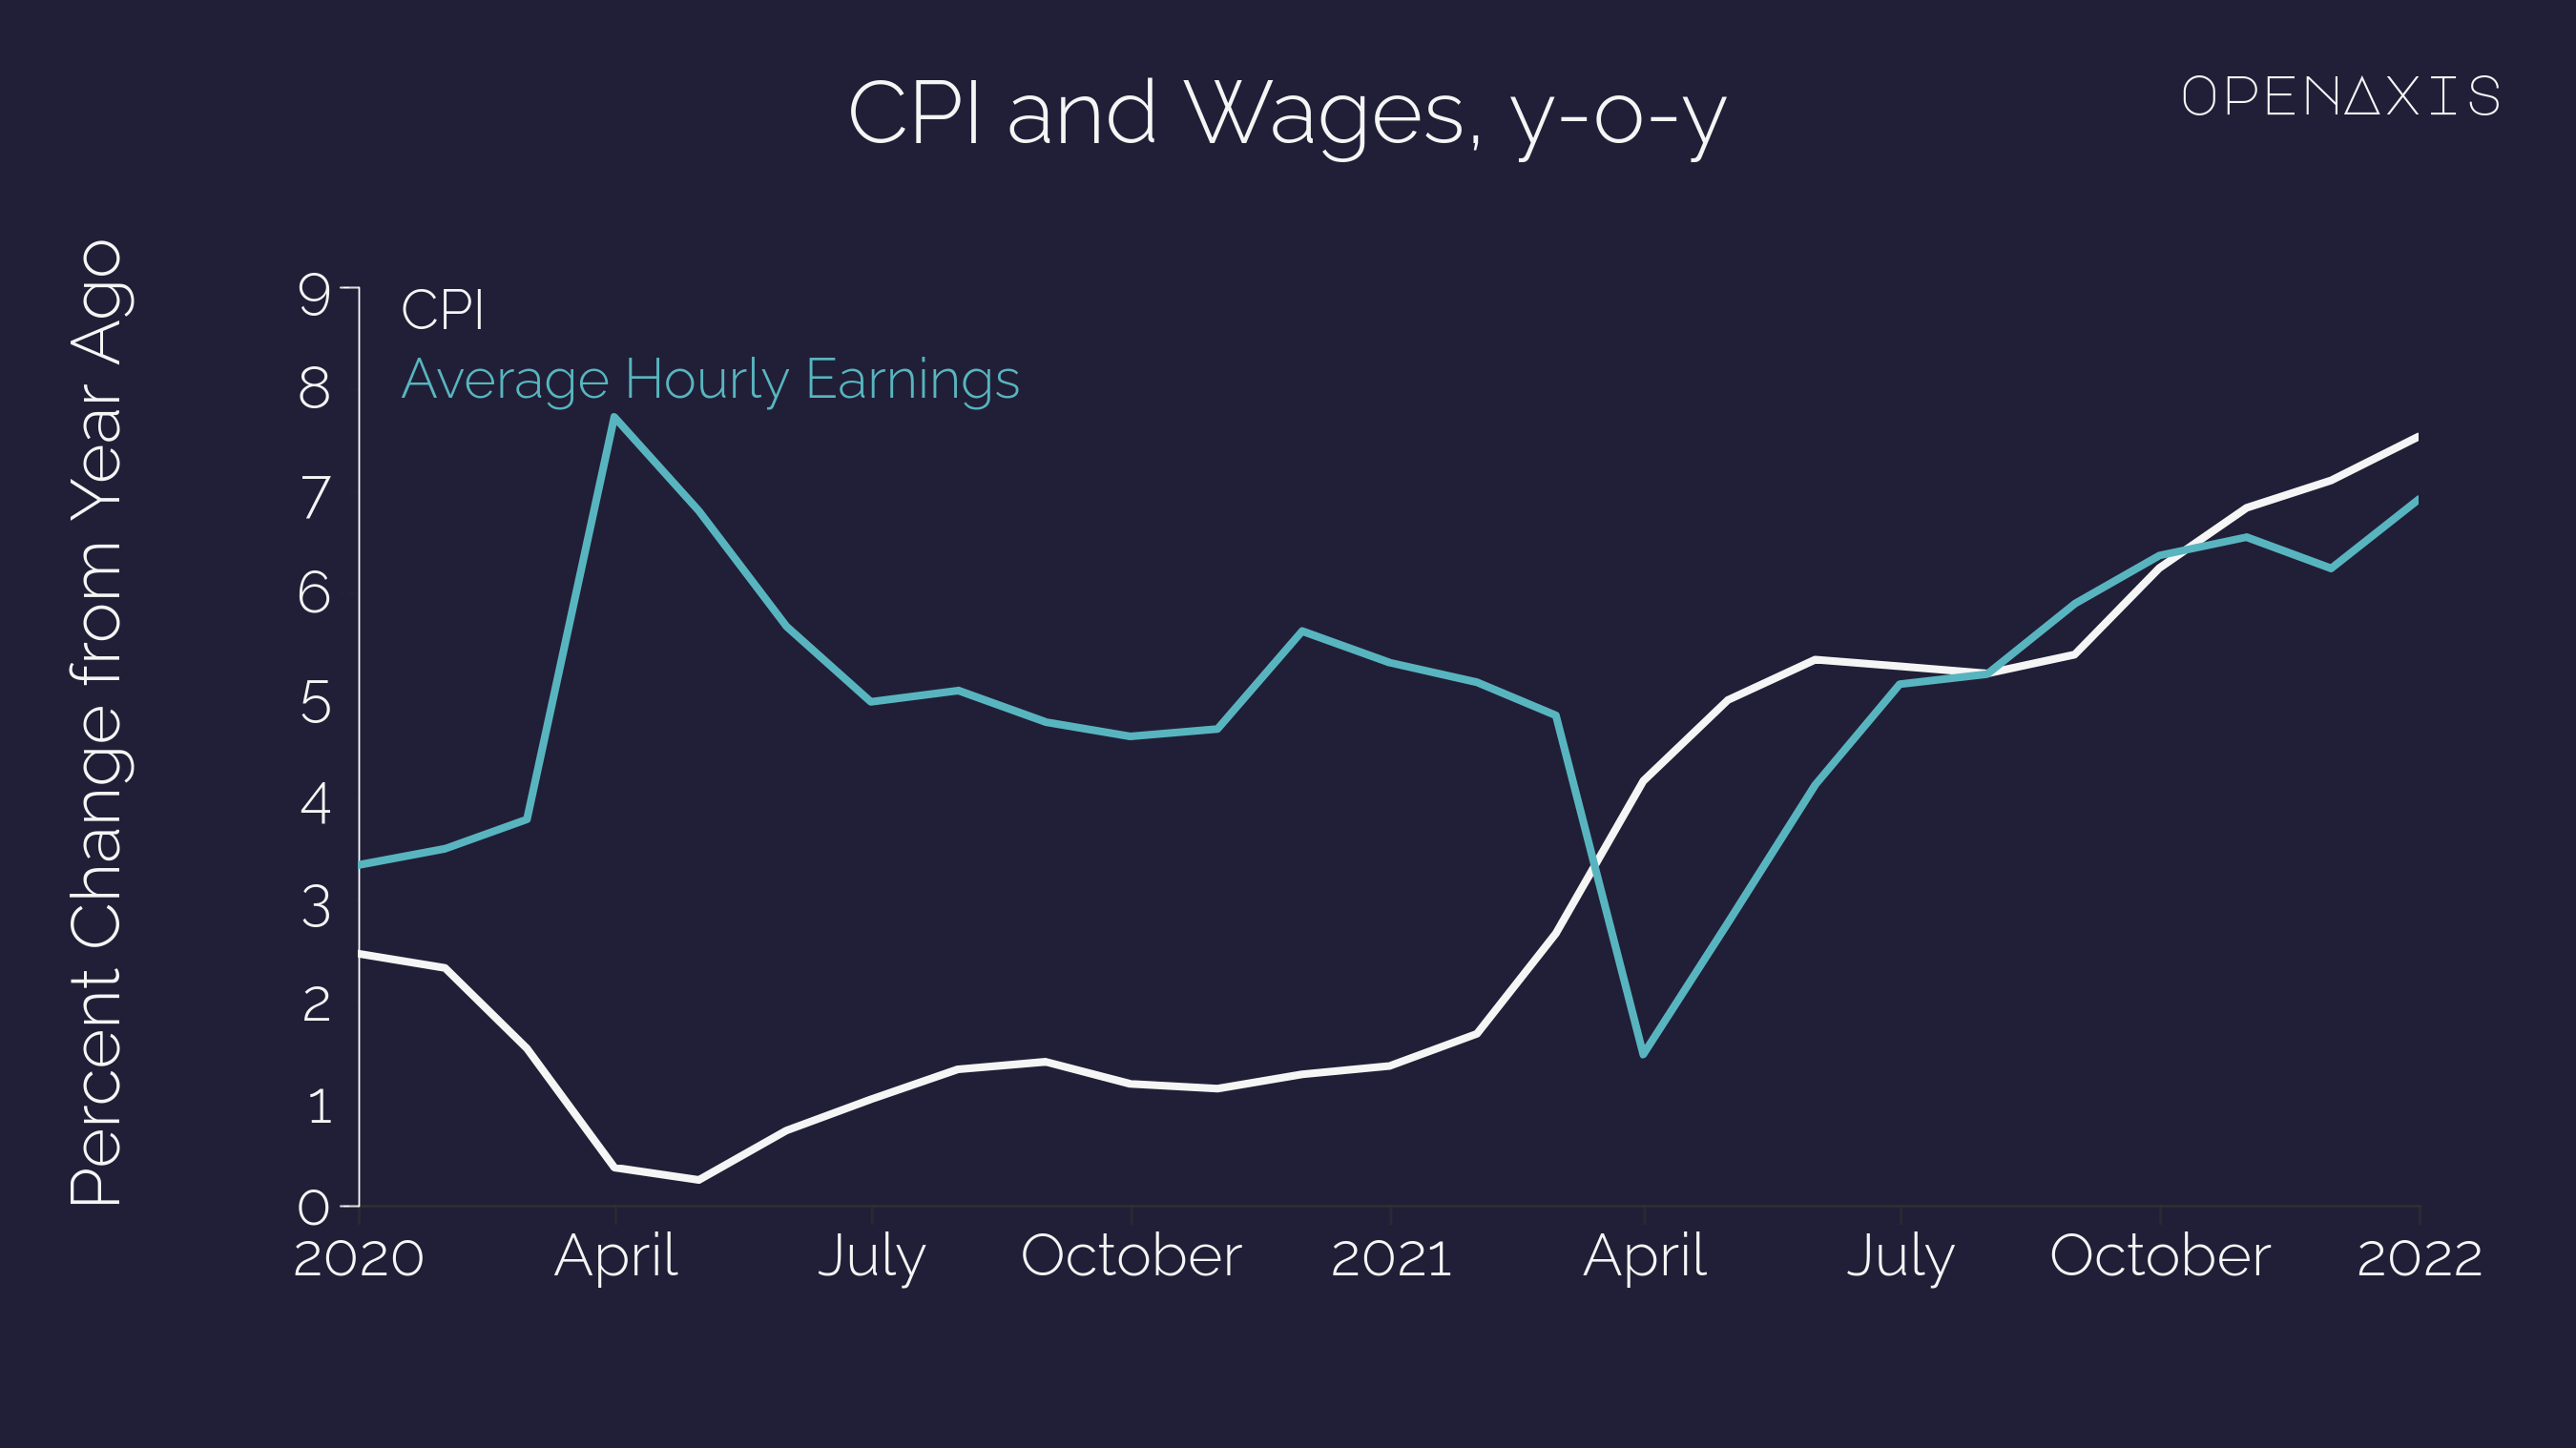 "CPI and Wages, y-o-y"